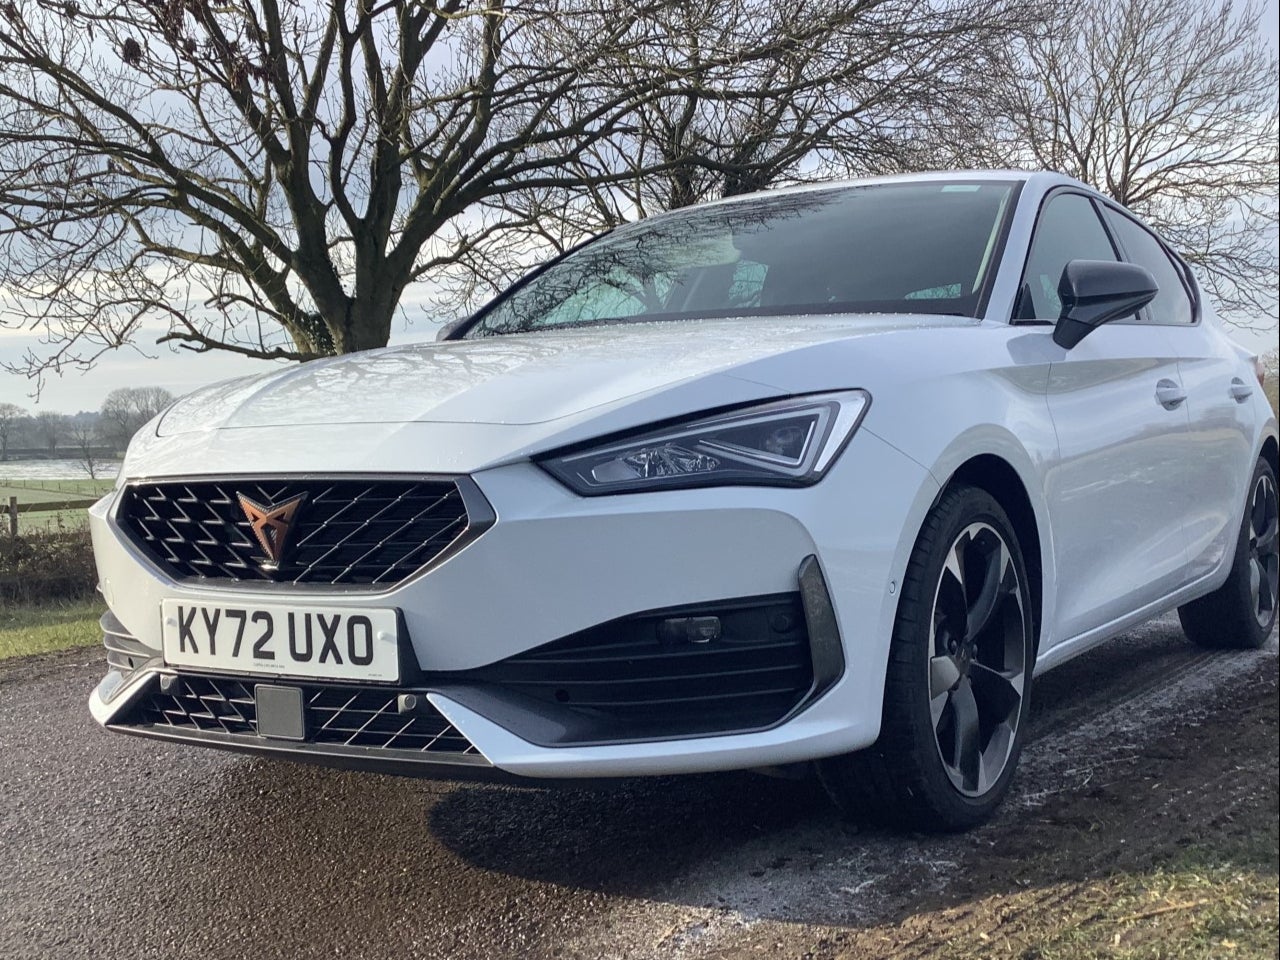 Cupra Leon: Seat's latest offering is serviceable, but unexciting